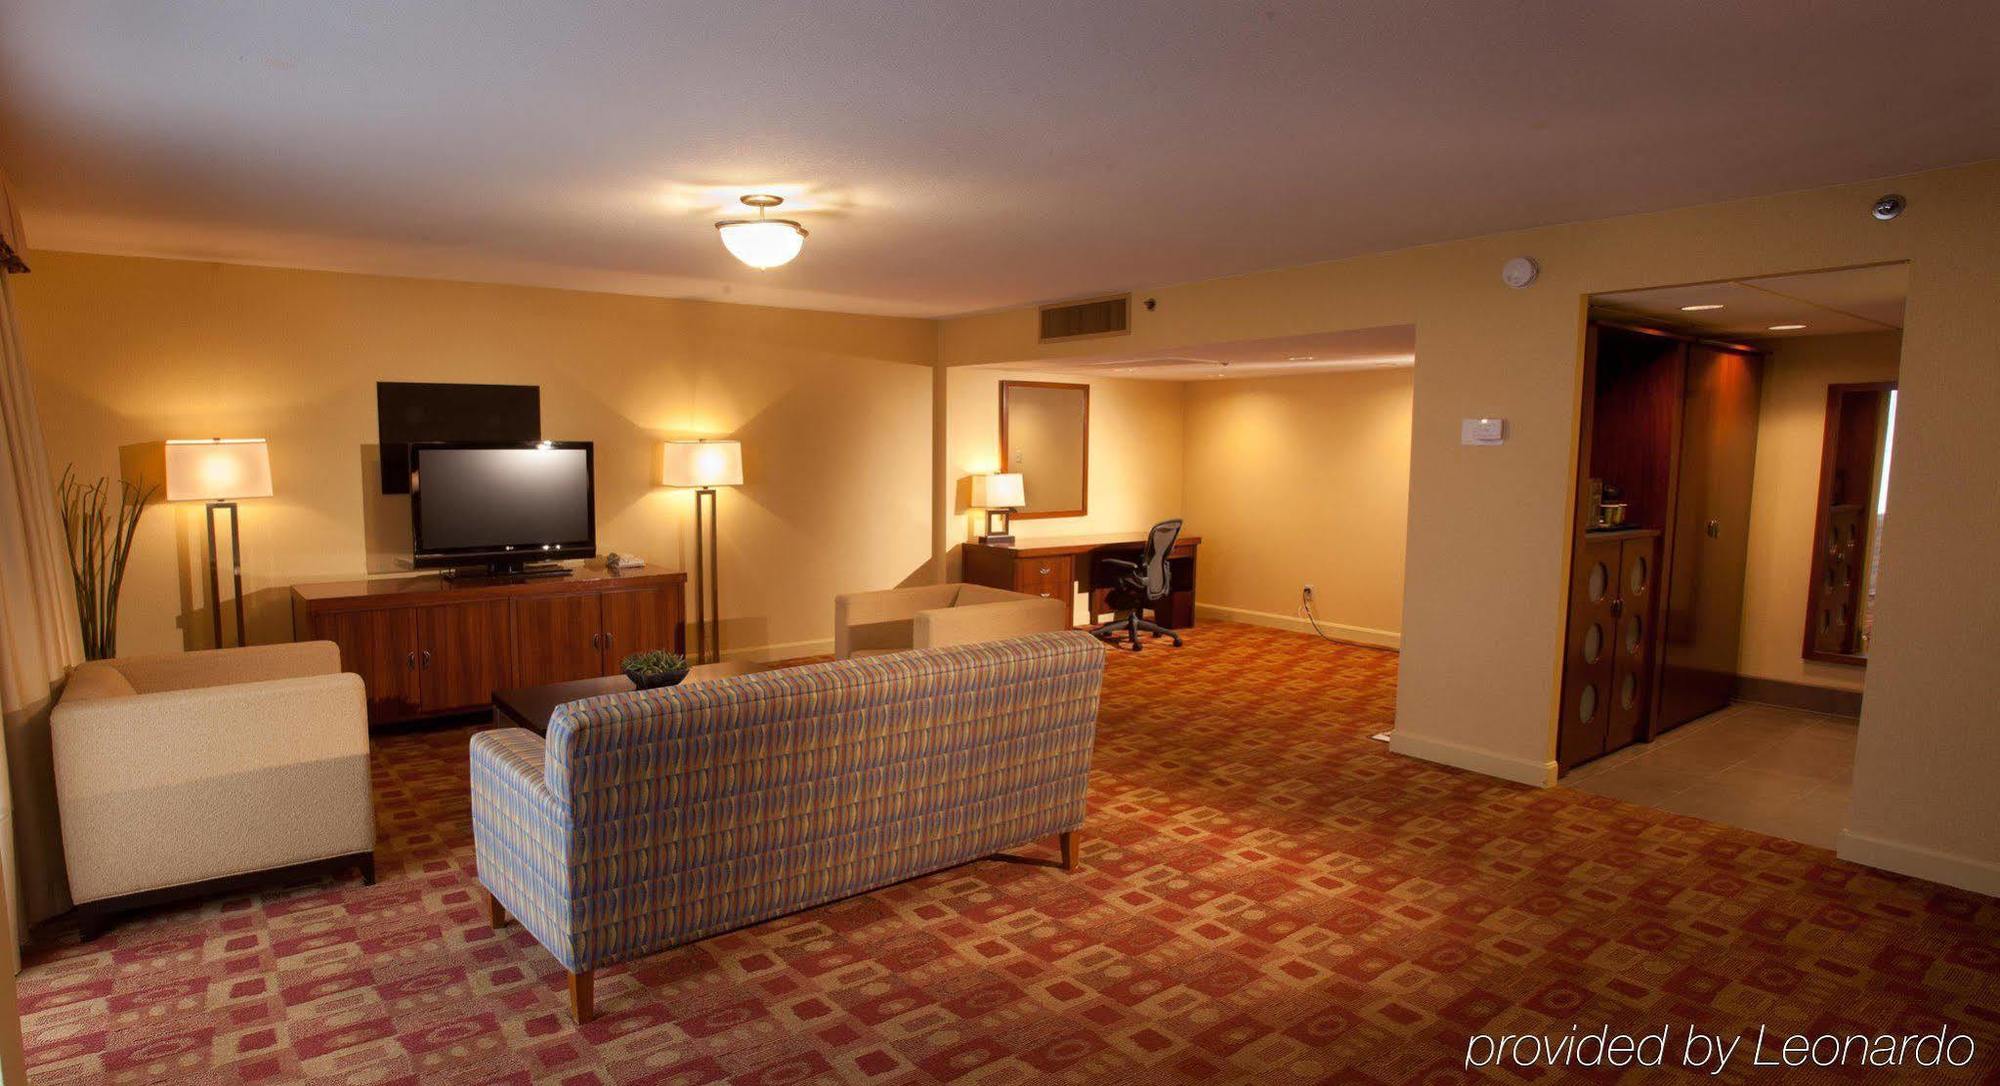 Doubletree By Hilton Dfw Airport North Hotel Irving Kamer foto